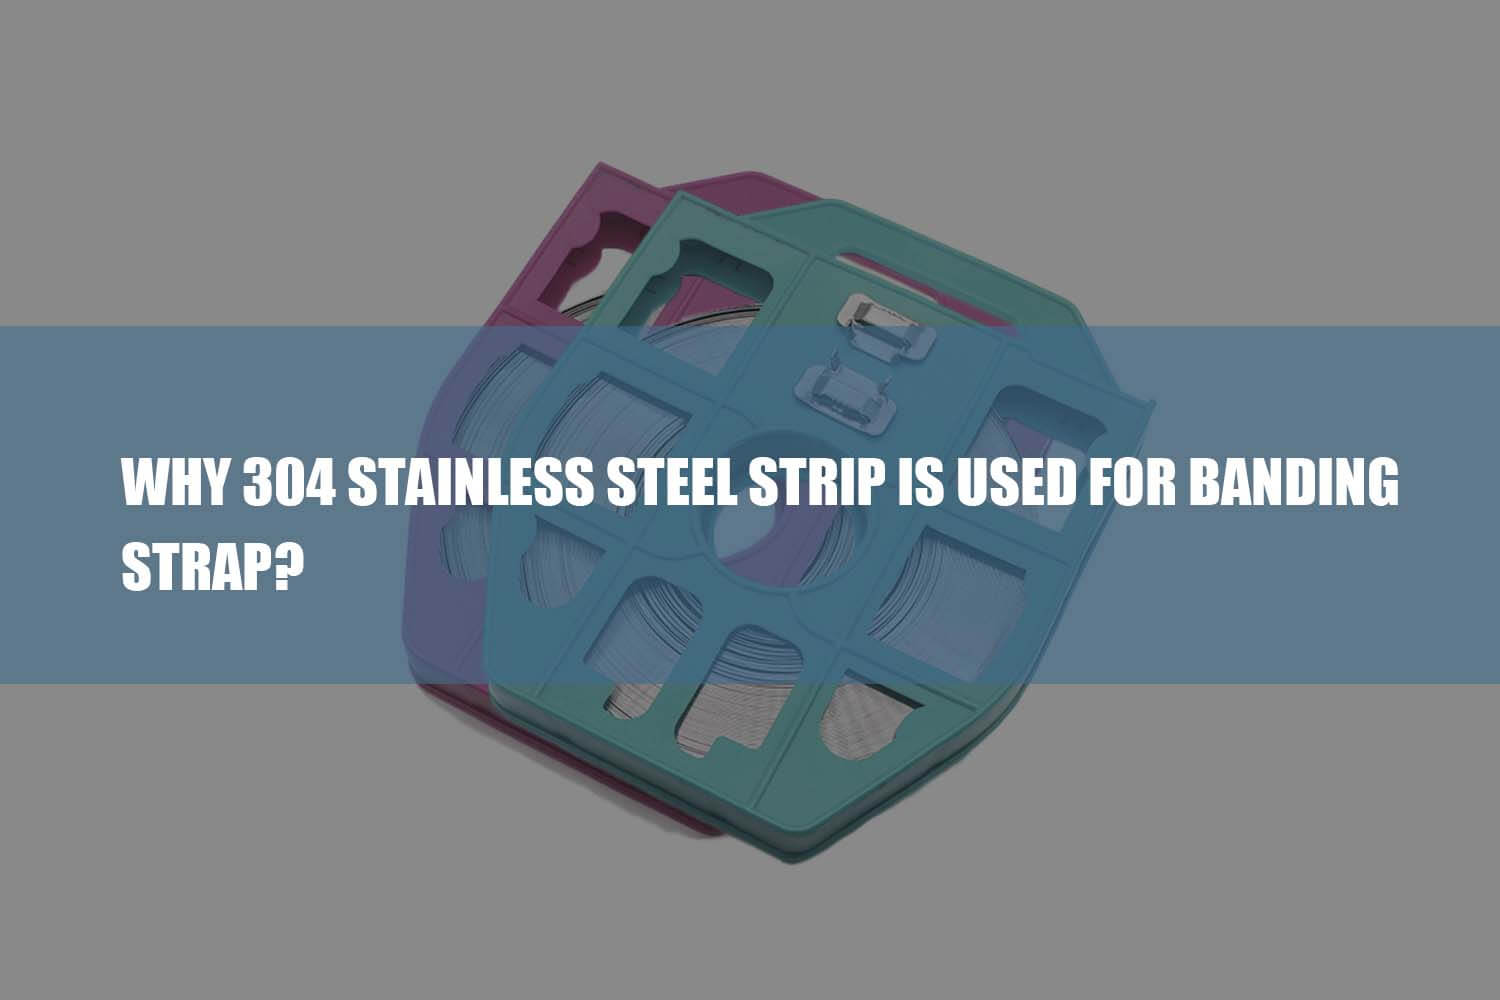 304 stainless steel strip is used for banding strap